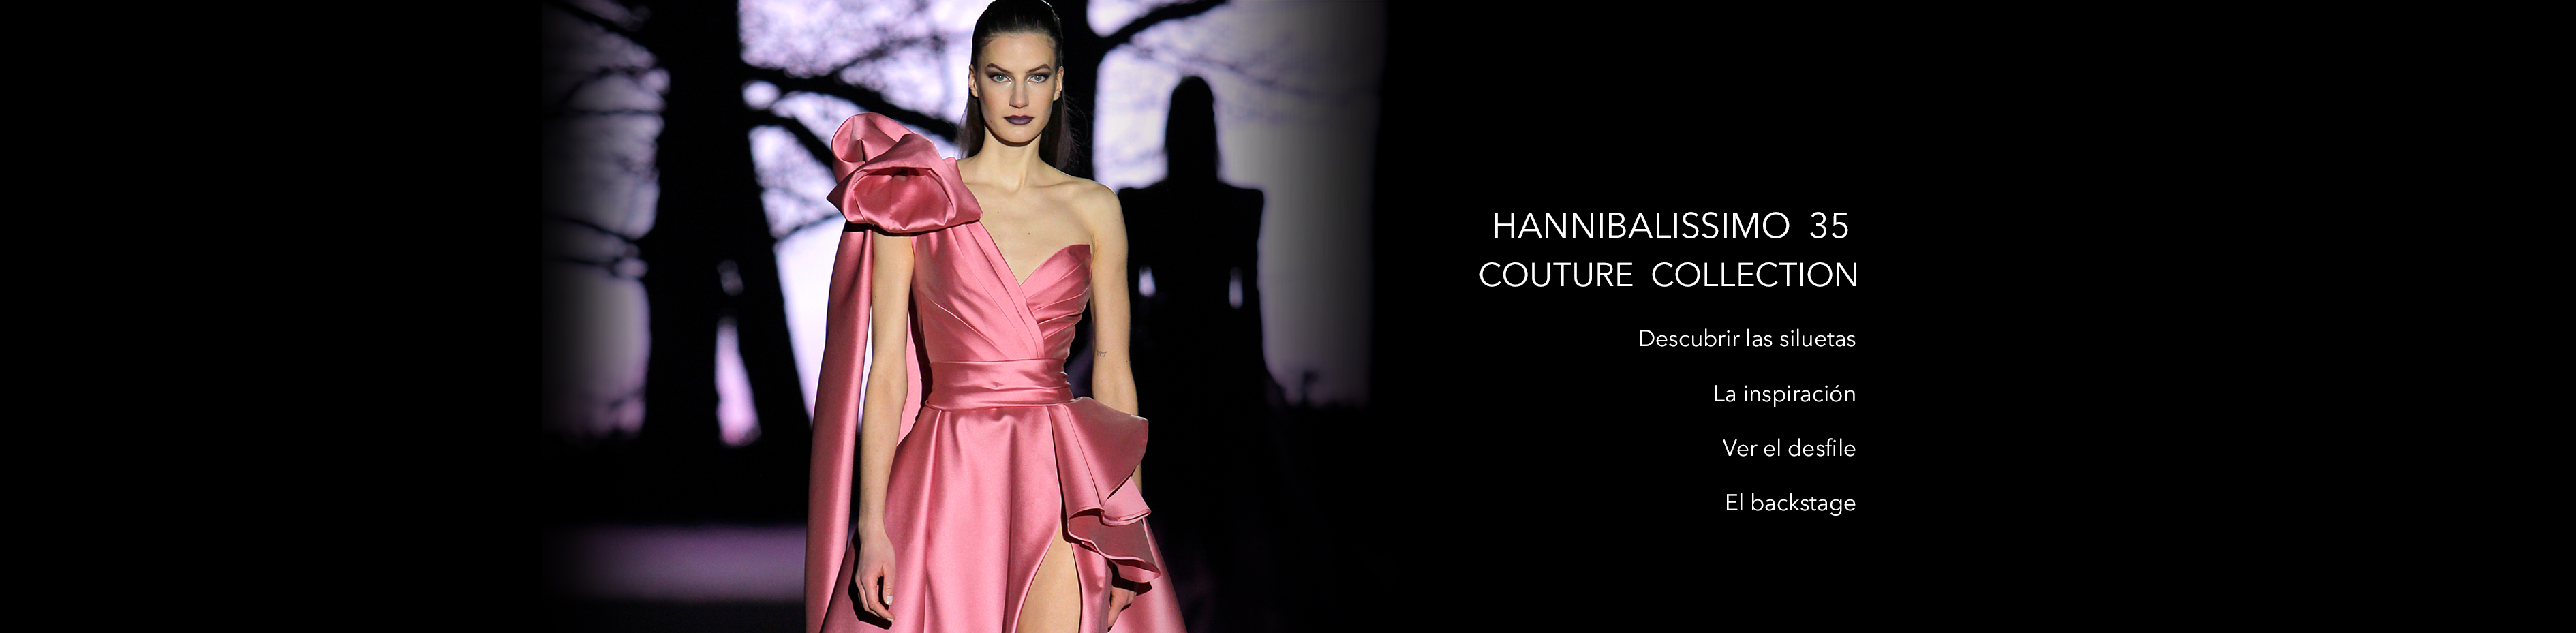 HANNIBALISSIMO 35 / COUTURE COLLECTION